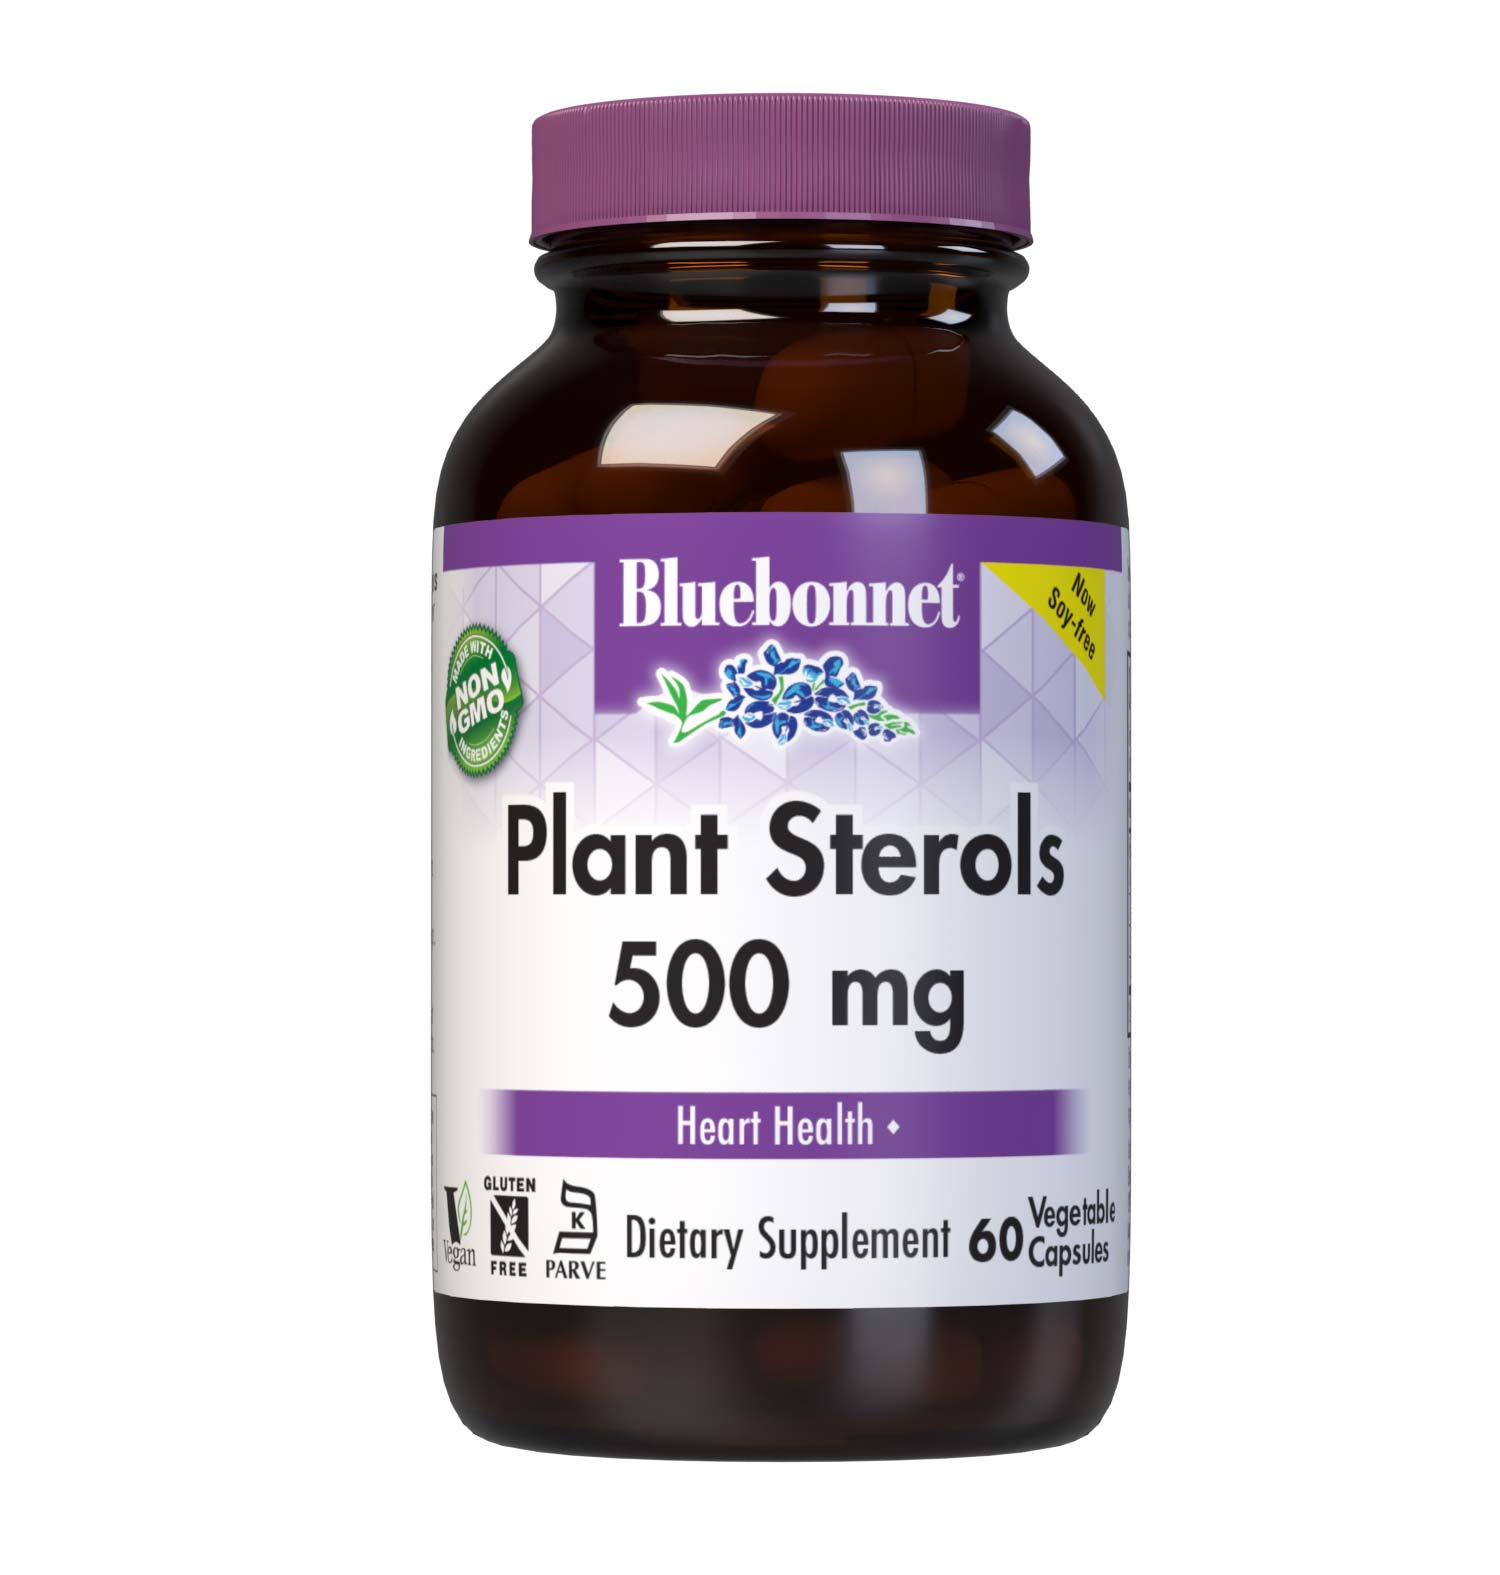 Bluebonnet’s Plant Sterols 500 mg 60 Vegetable Capsules are formulated with non-GMO plant sterols from sunflower oil to help limit cholesterol absorption, helping to support cholesterol levels already within the normal range. #size_60 count